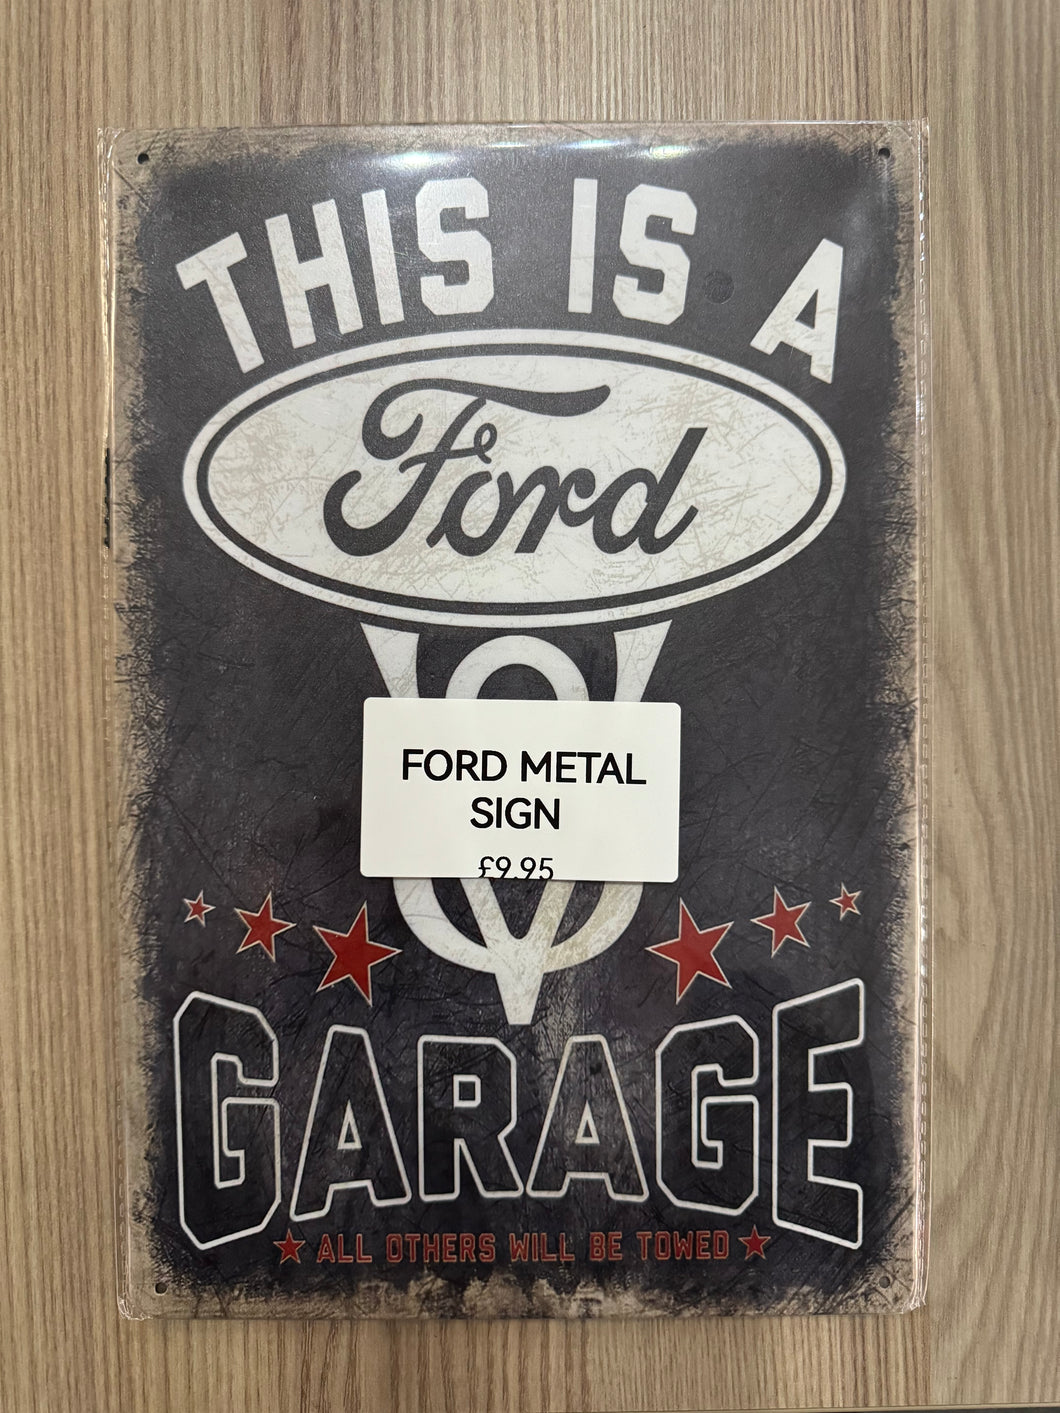 Ford Metal Sign “This is a Ford Garage”